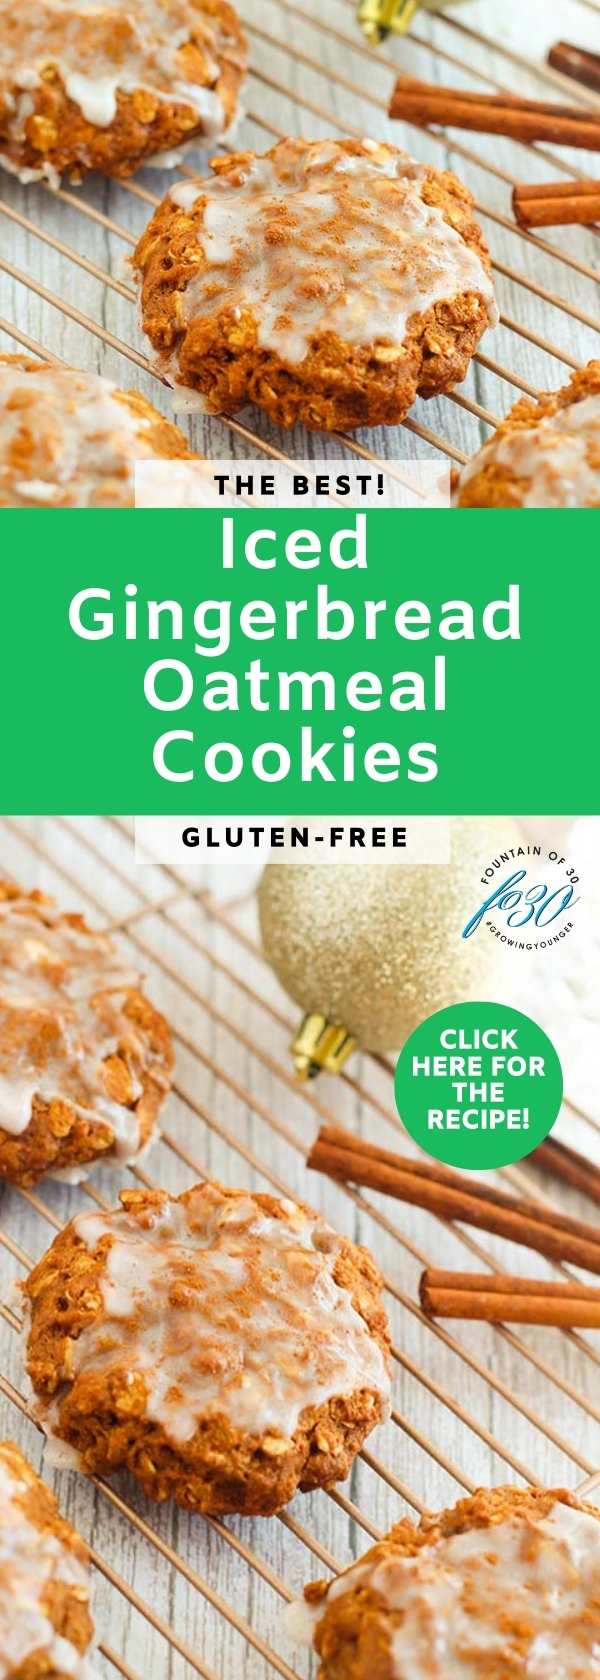 best iced gingerbread oatmeal cookies fountainof30